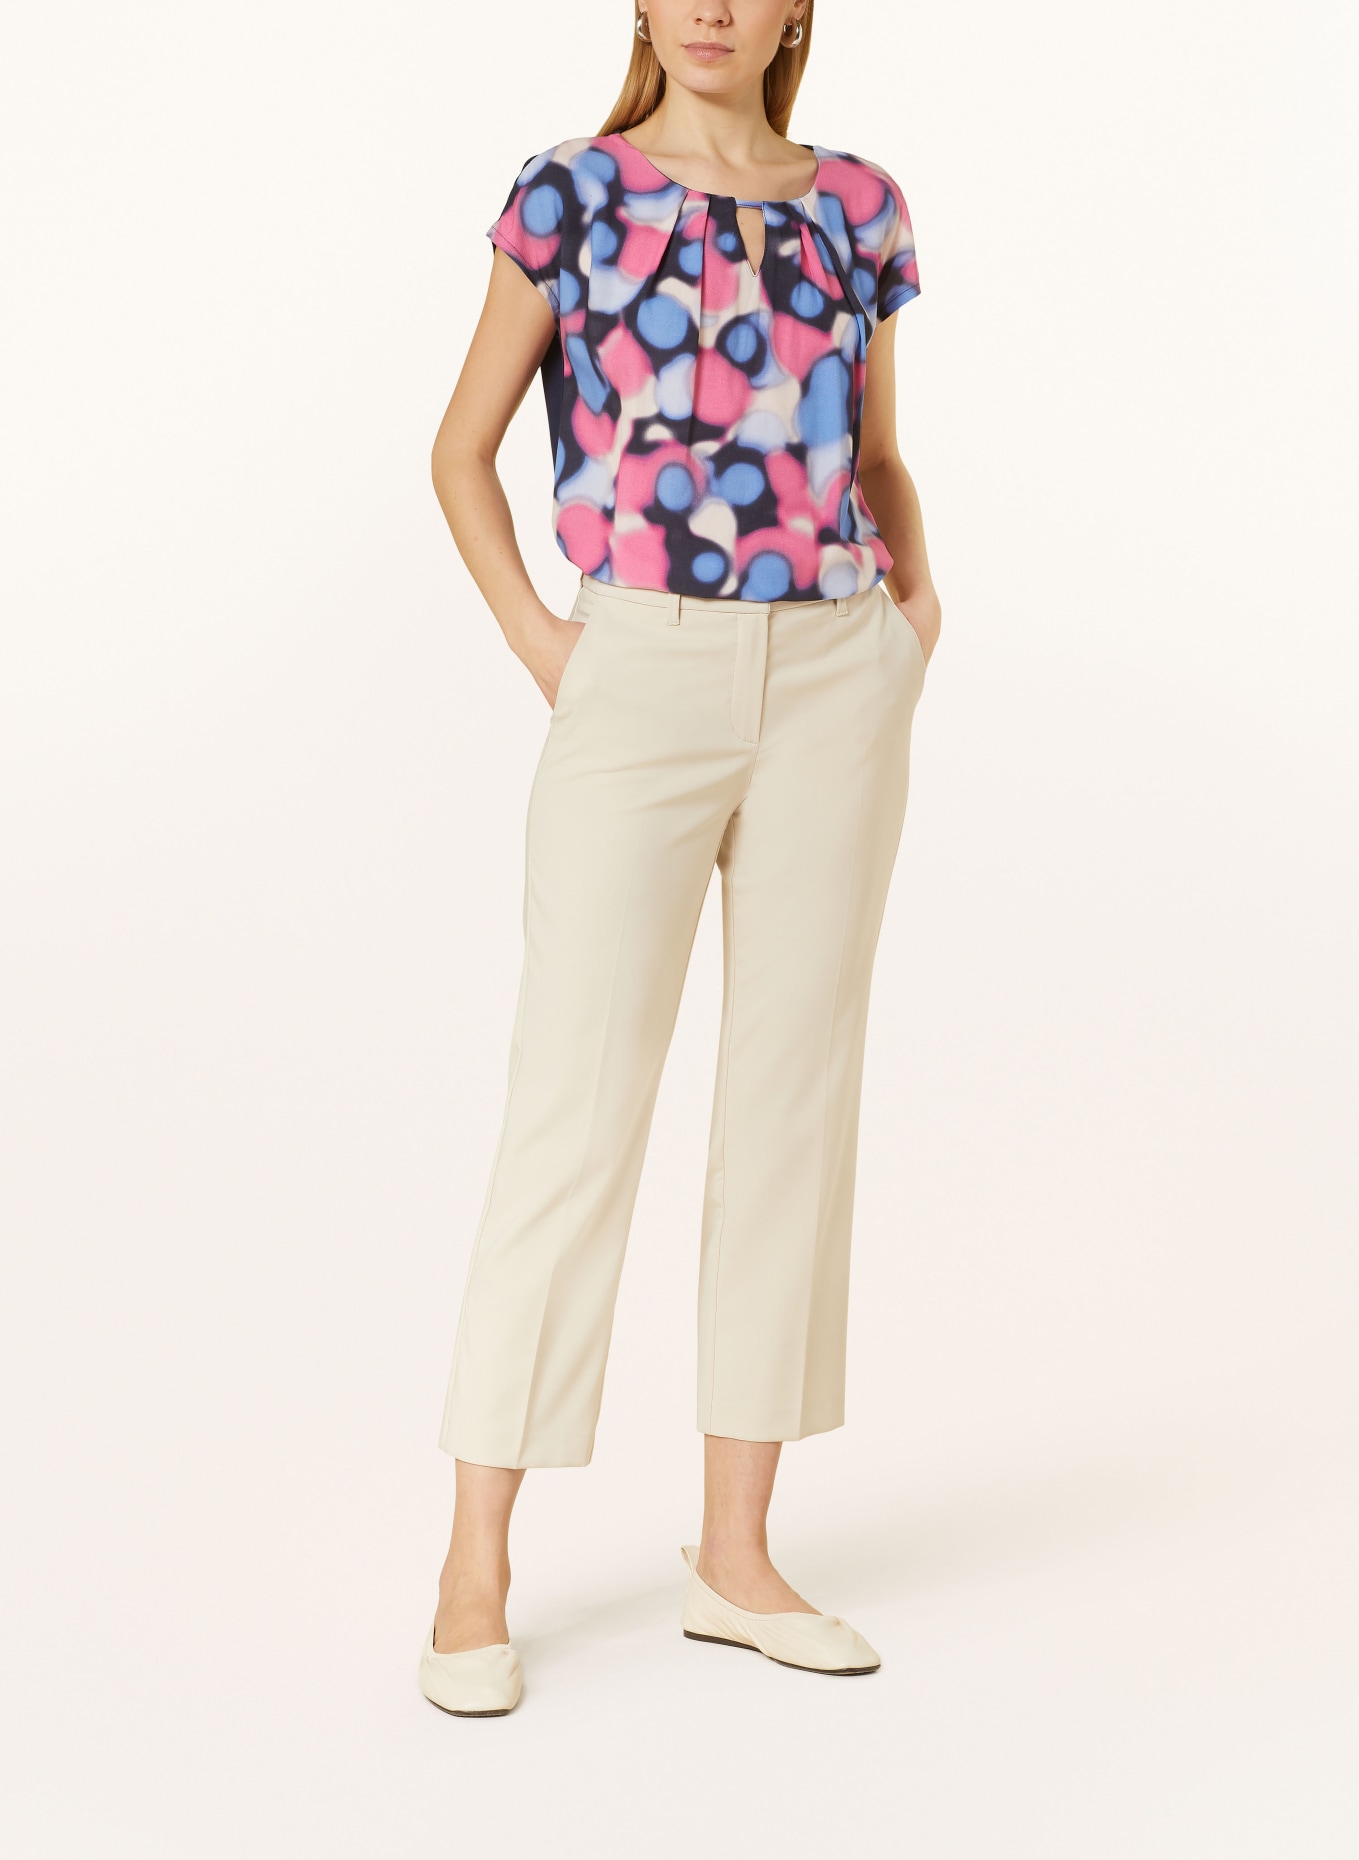 BETTY&CO Shirt blouse in mixed materials, Color: DARK GRAY/ BLUE/ PINK (Image 2)